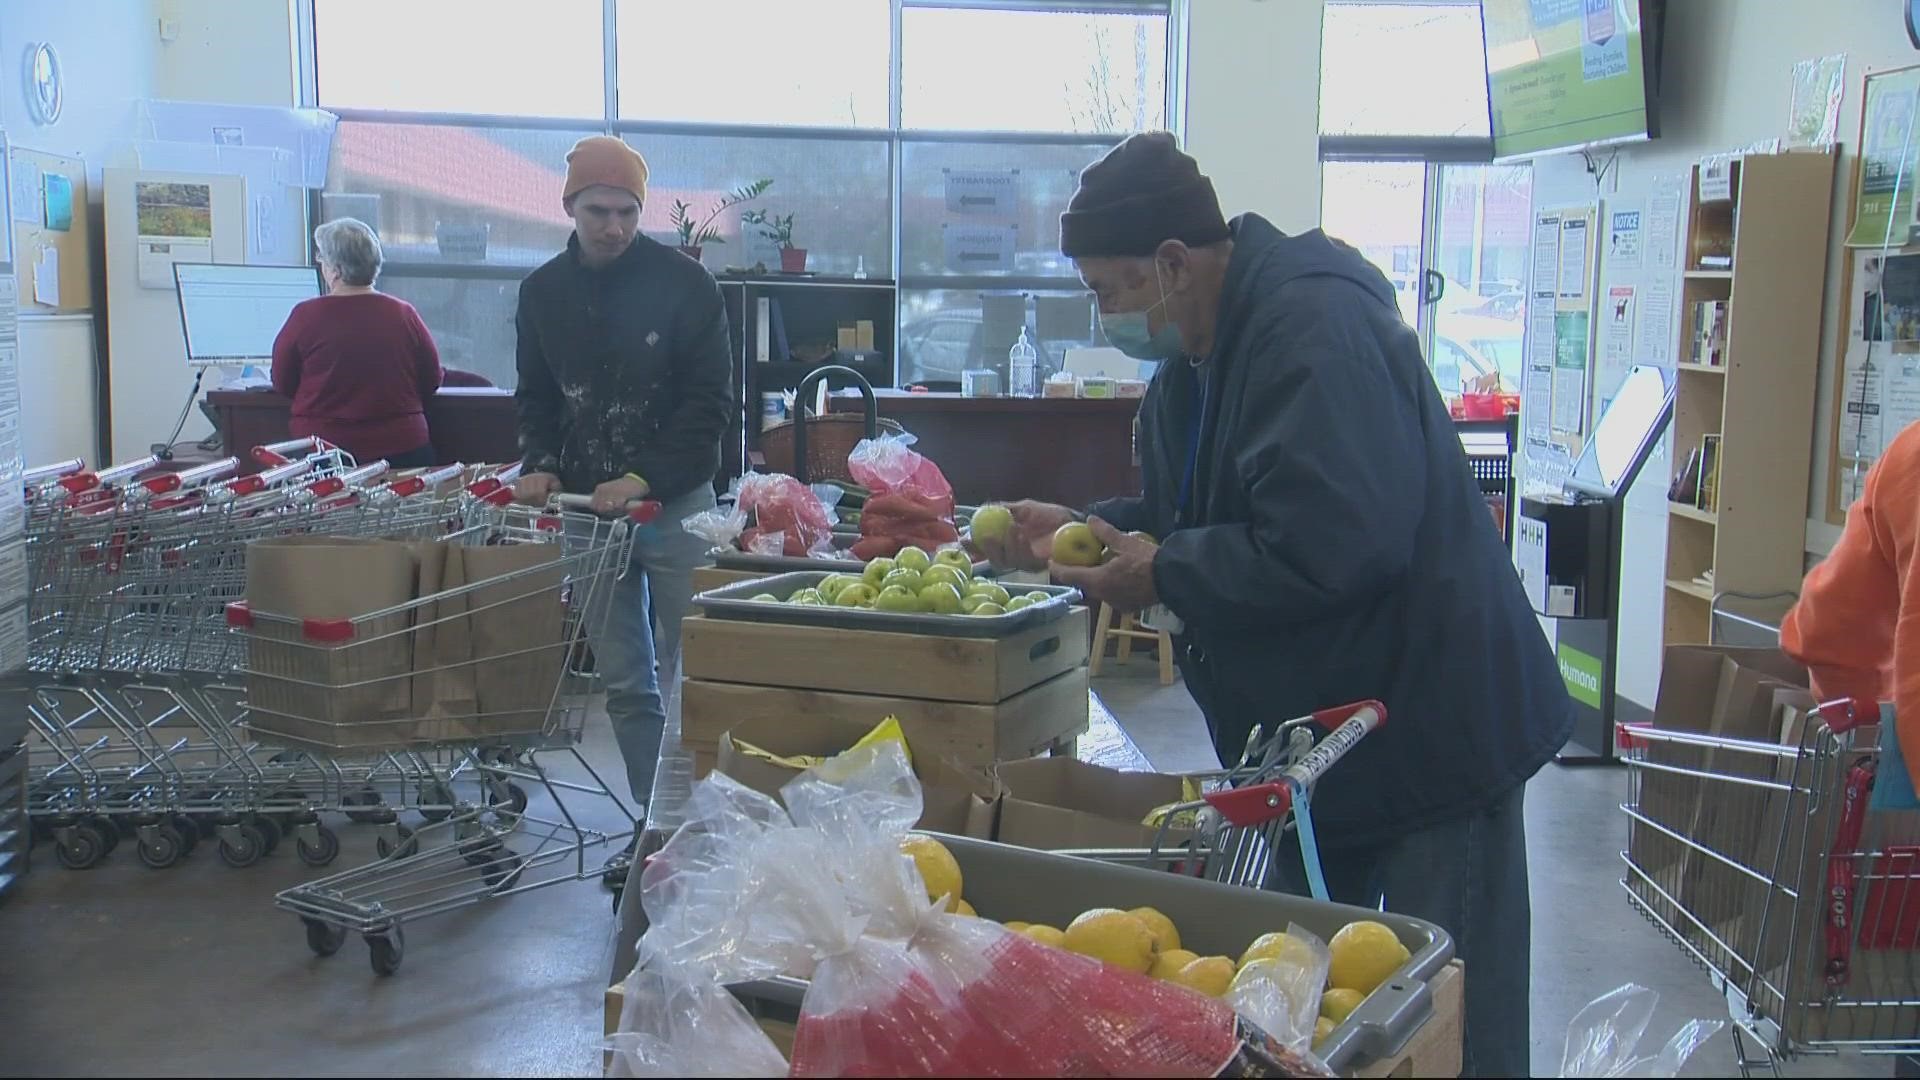 SNAP food benefits have dropped back to pre-pandemic levels. A Vancouver food bank is worried about the impact for families, amid rising food costs.